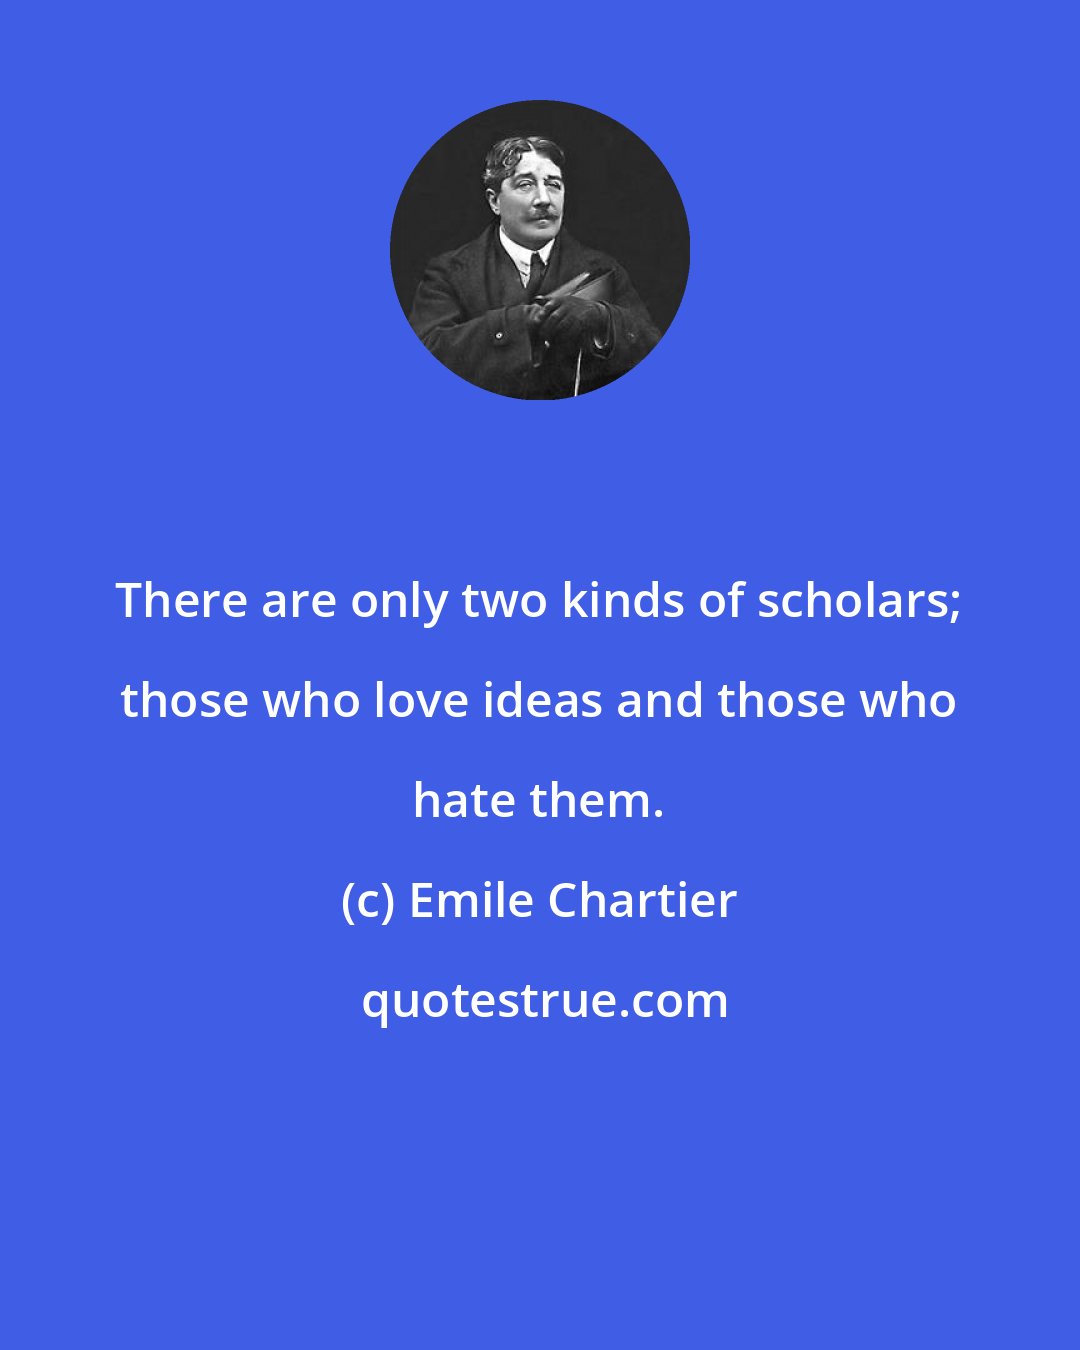 Emile Chartier: There are only two kinds of scholars; those who love ideas and those who hate them.